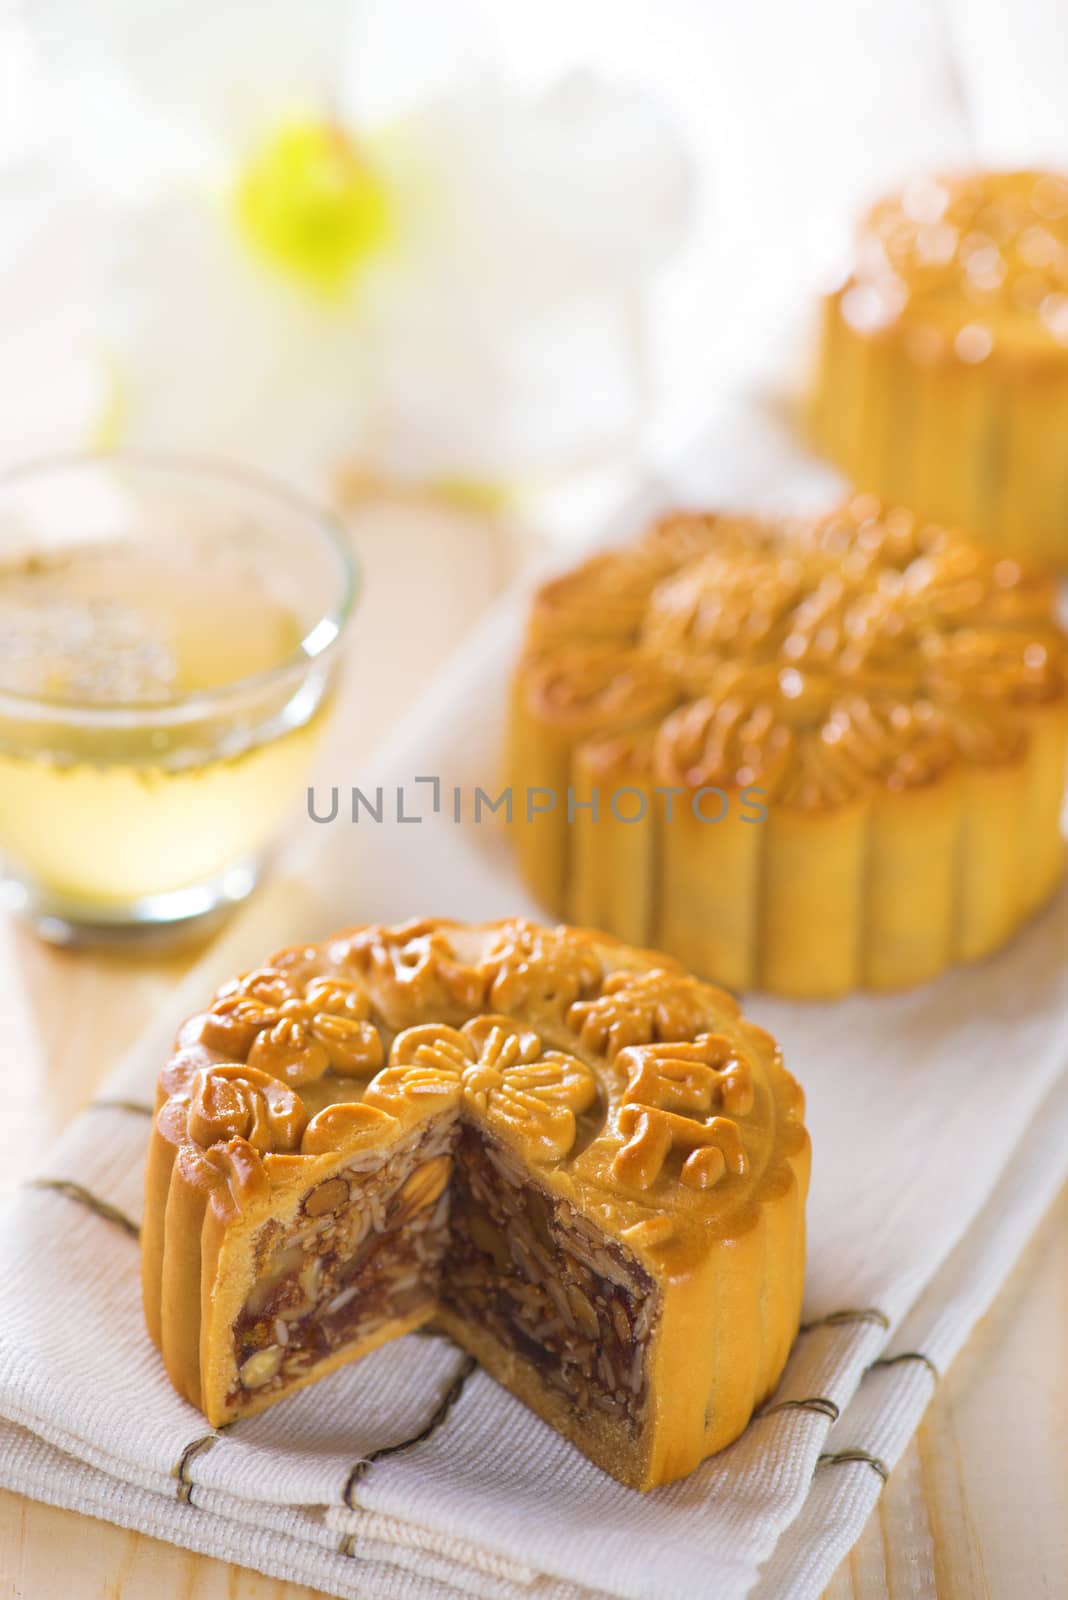 Chinese mid autumn festival foods. Traditional mooncakes on table setting with teacup.  The Chinese words on the mooncakes means assorted fruits nuts, not a logo or trademark.